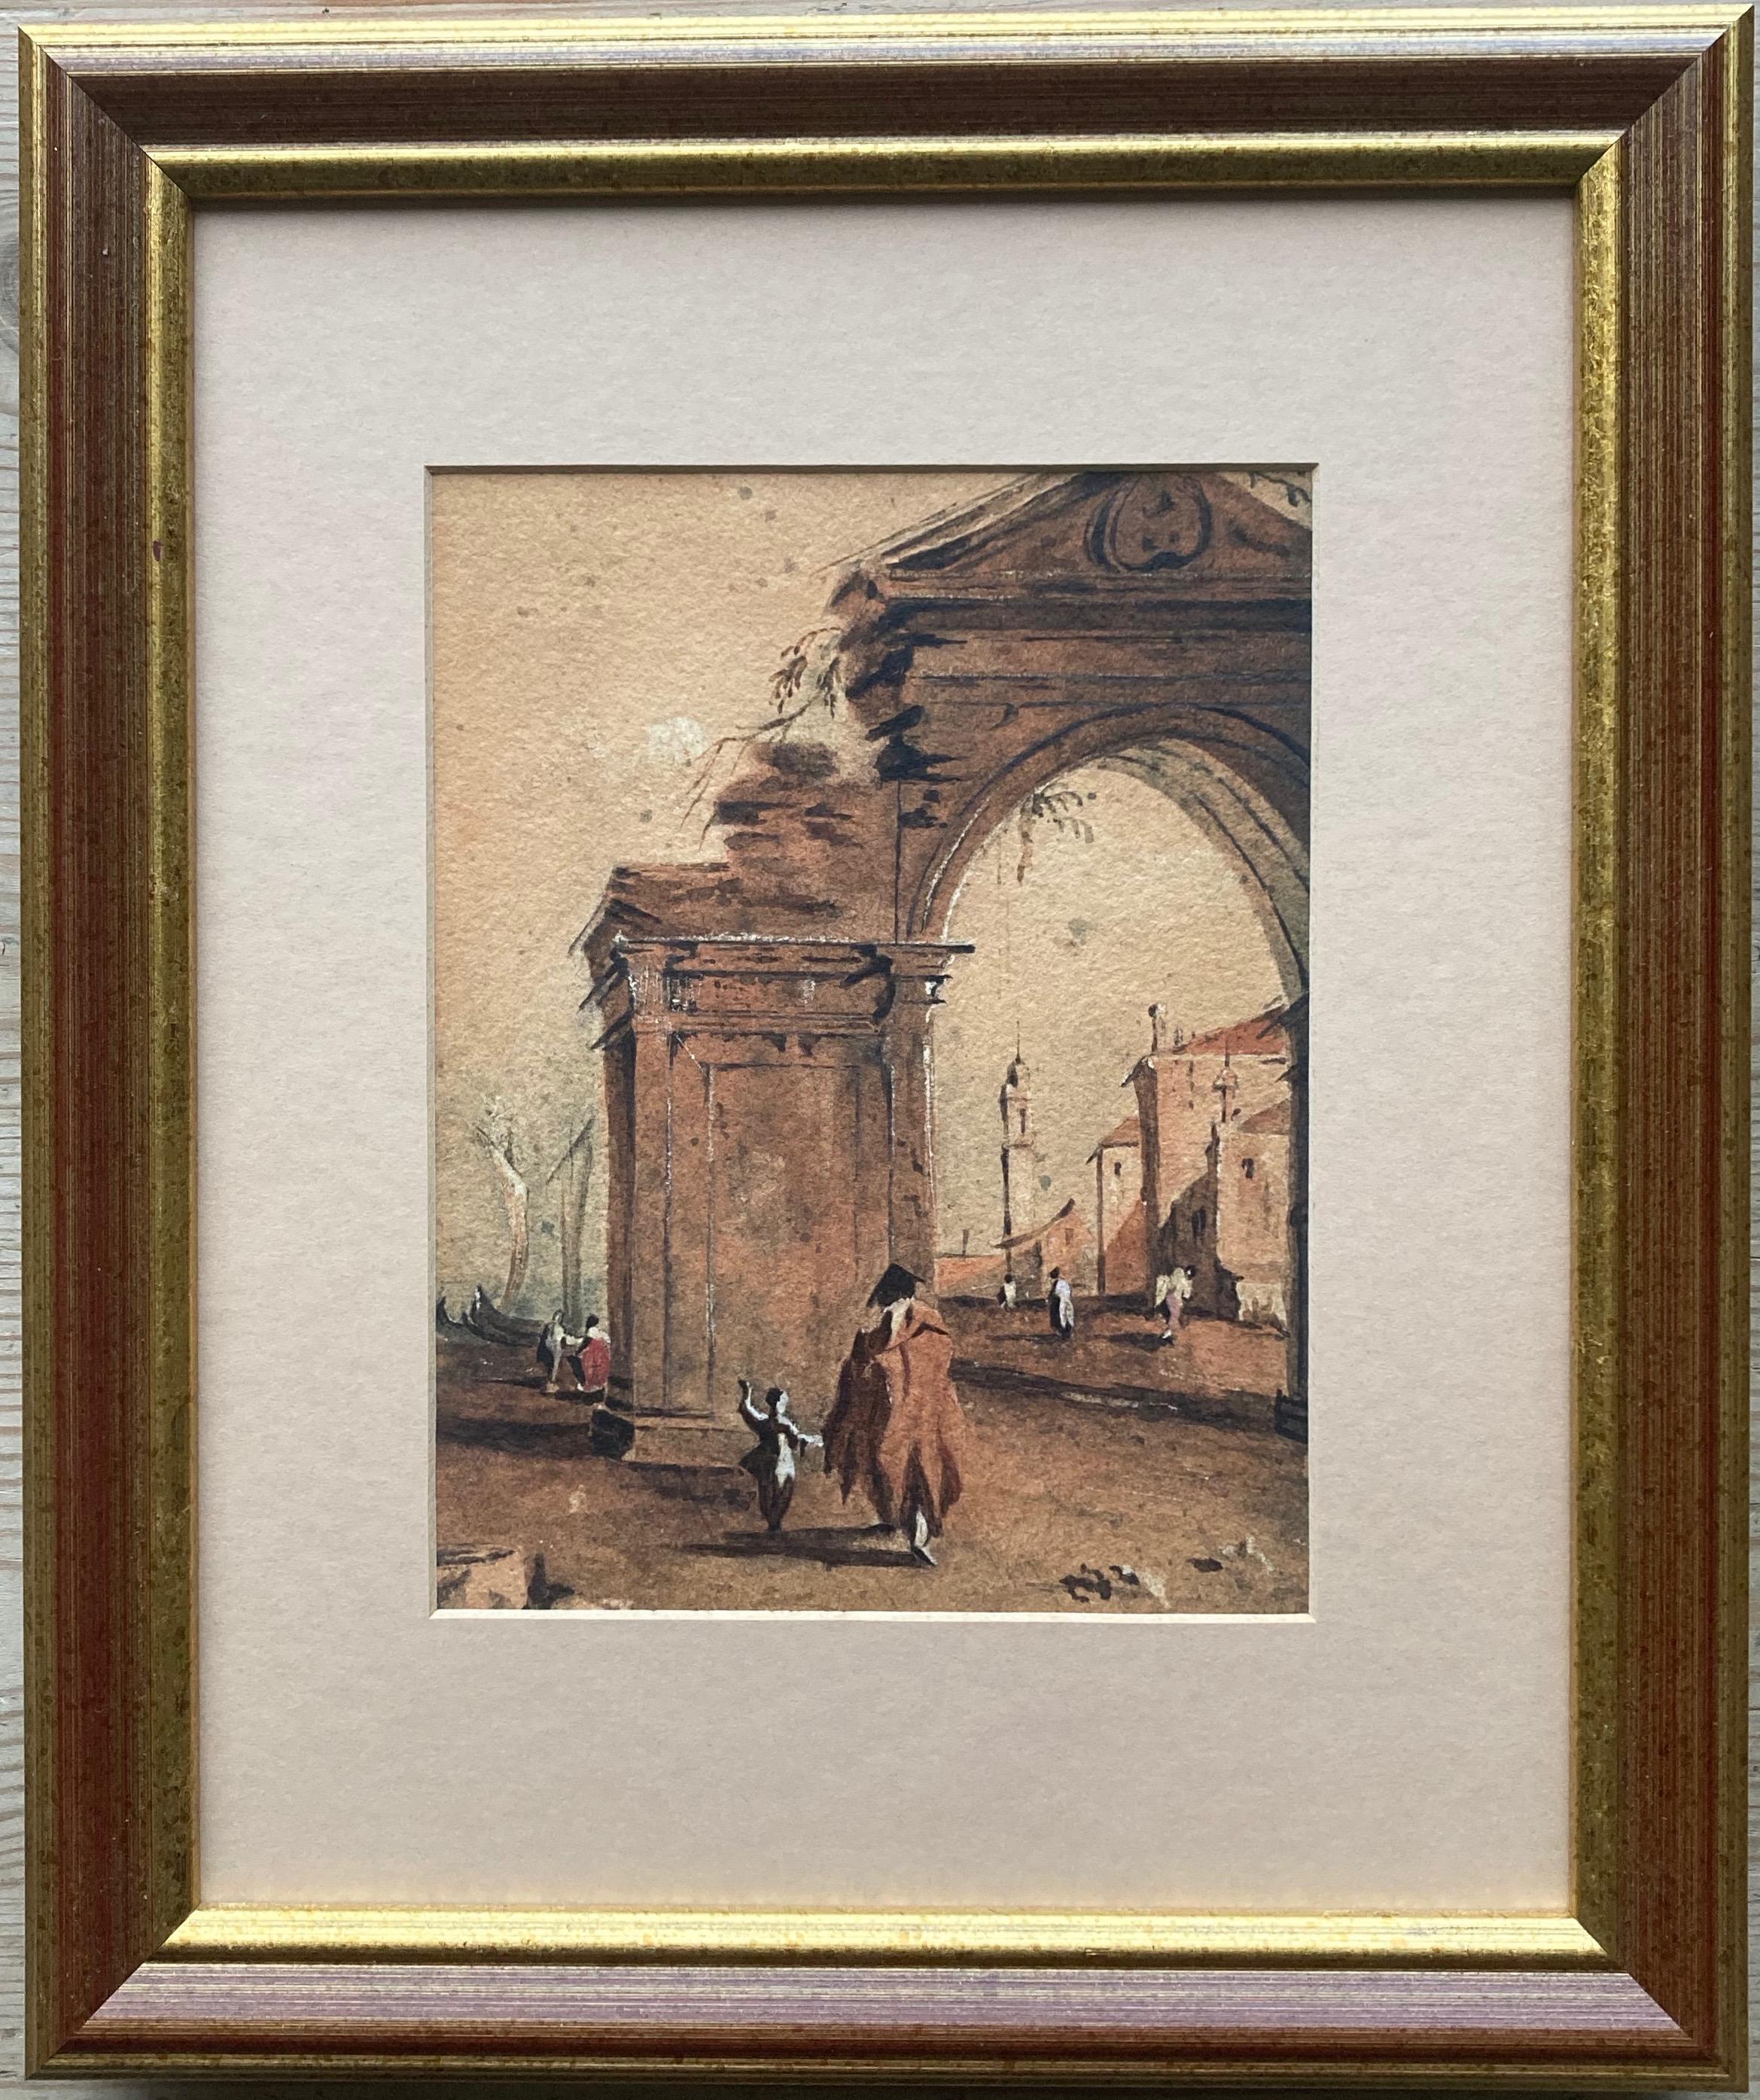 A lively, well executed sketch painted by a 19th century follower of Francesco Guardi 

Follower of Francesco Guardi, 19th Century
Figures by a Roman Arch
Watercolour with ink and scratching out
6½ x 5 inches (excluding the frame)
12 x 10 inches